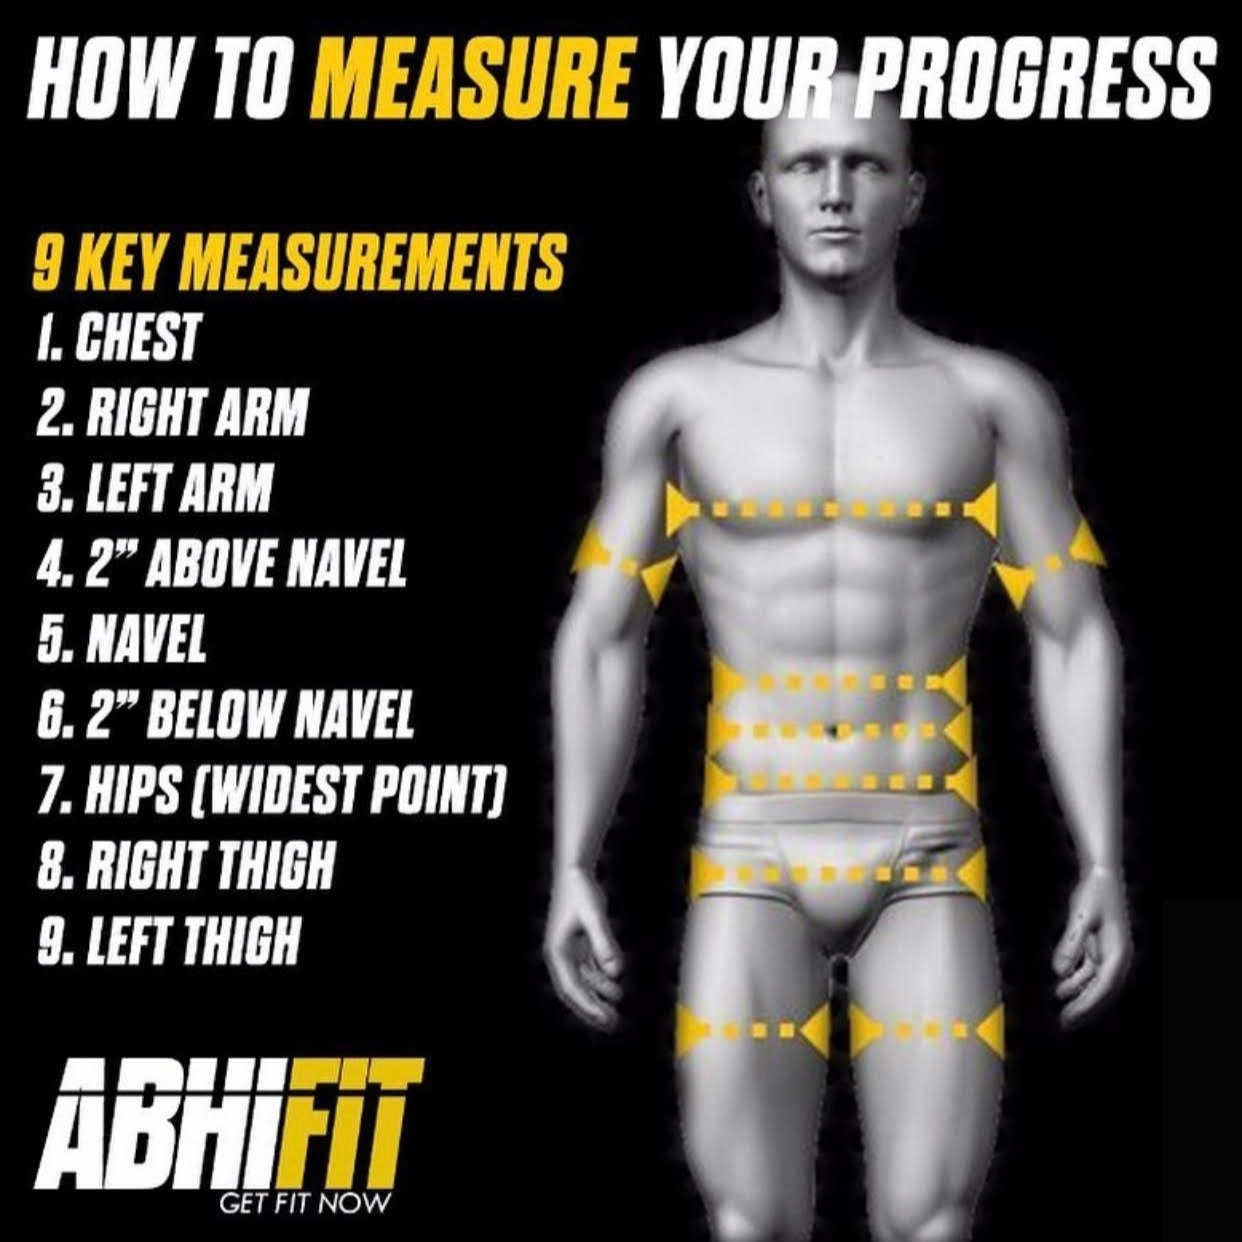 https://www.abhifit.com/wp-content/uploads/2022/02/How-to-Measure-Your-Fat-Loss-Muscle-Gain-Progress-by-Personal-Trainer-in-Dubai-UAE.jpg